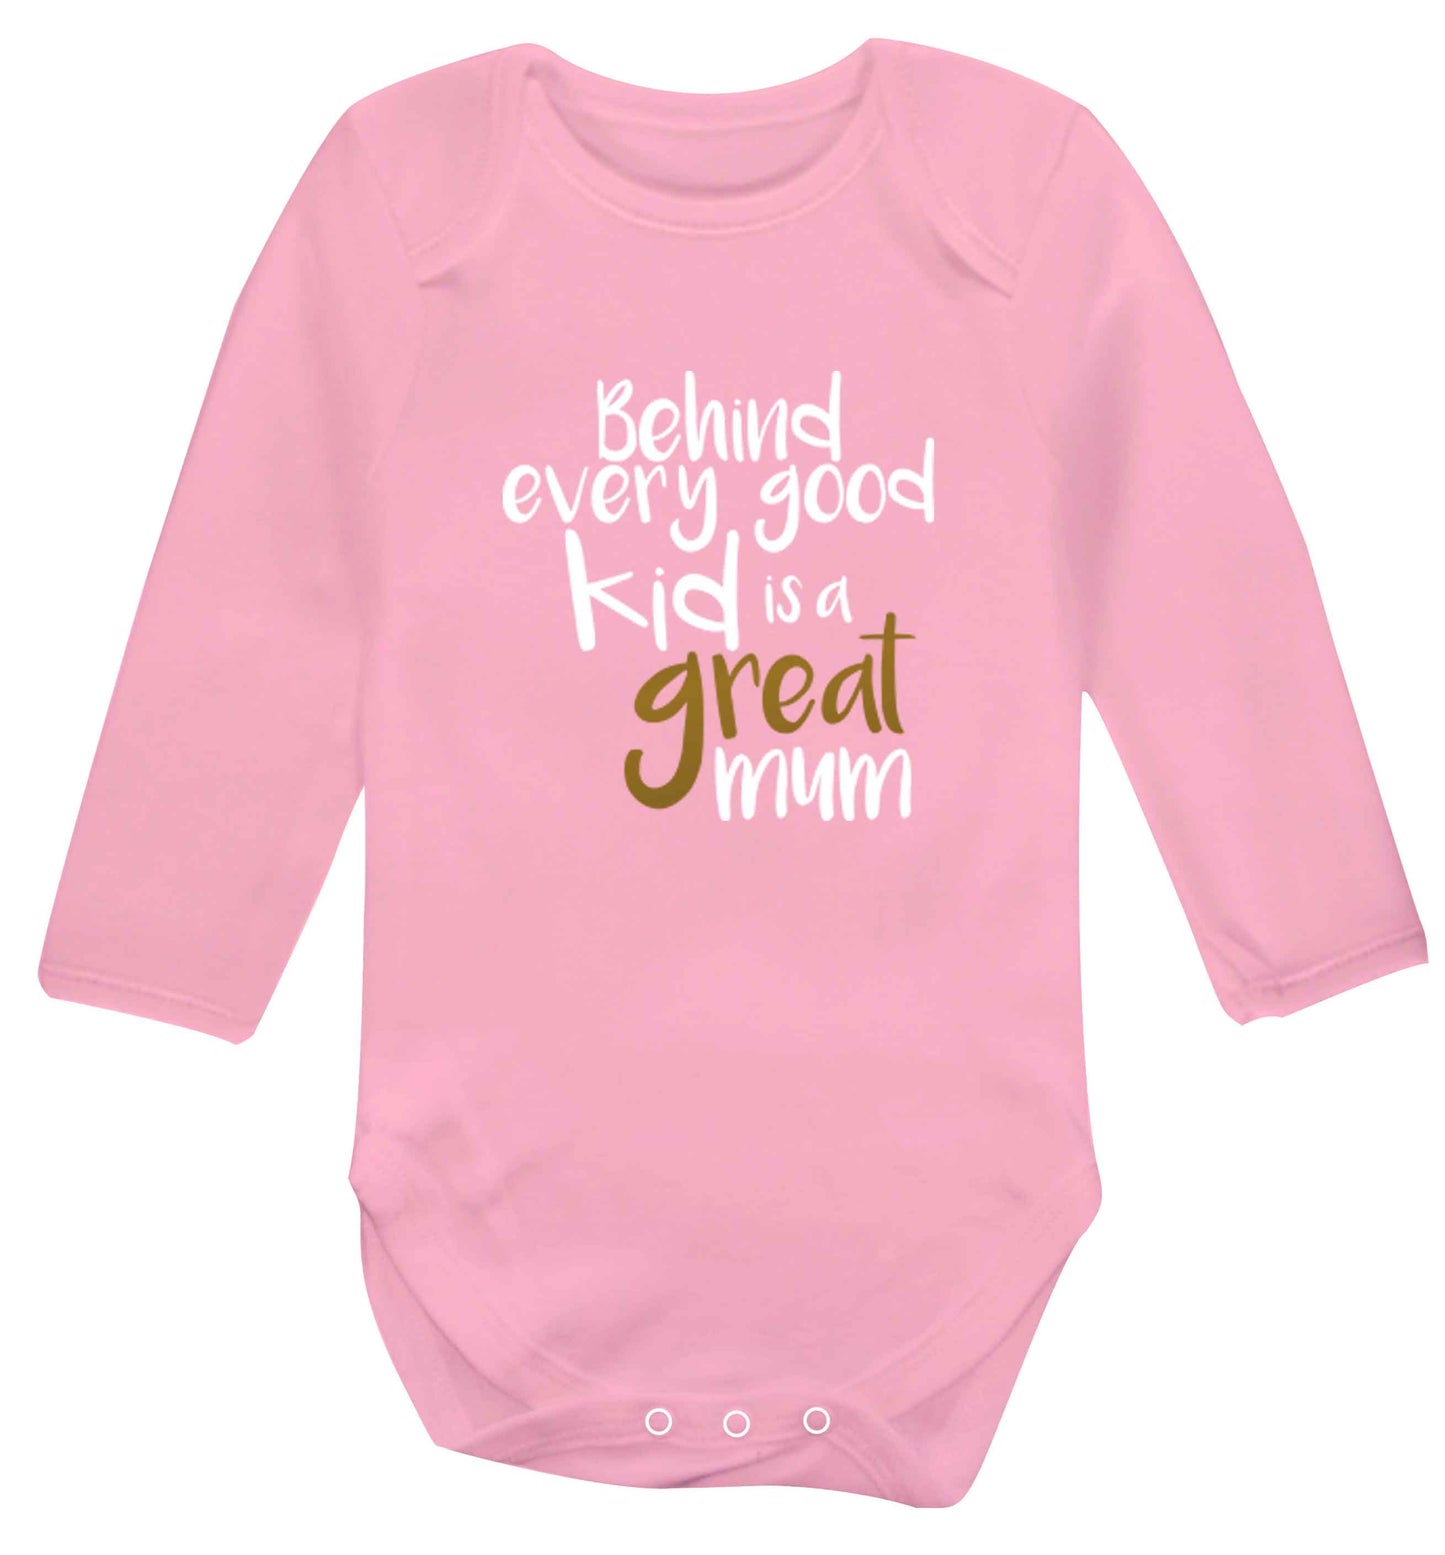 Behind every good kid is a great mum baby vest long sleeved pale pink 6-12 months